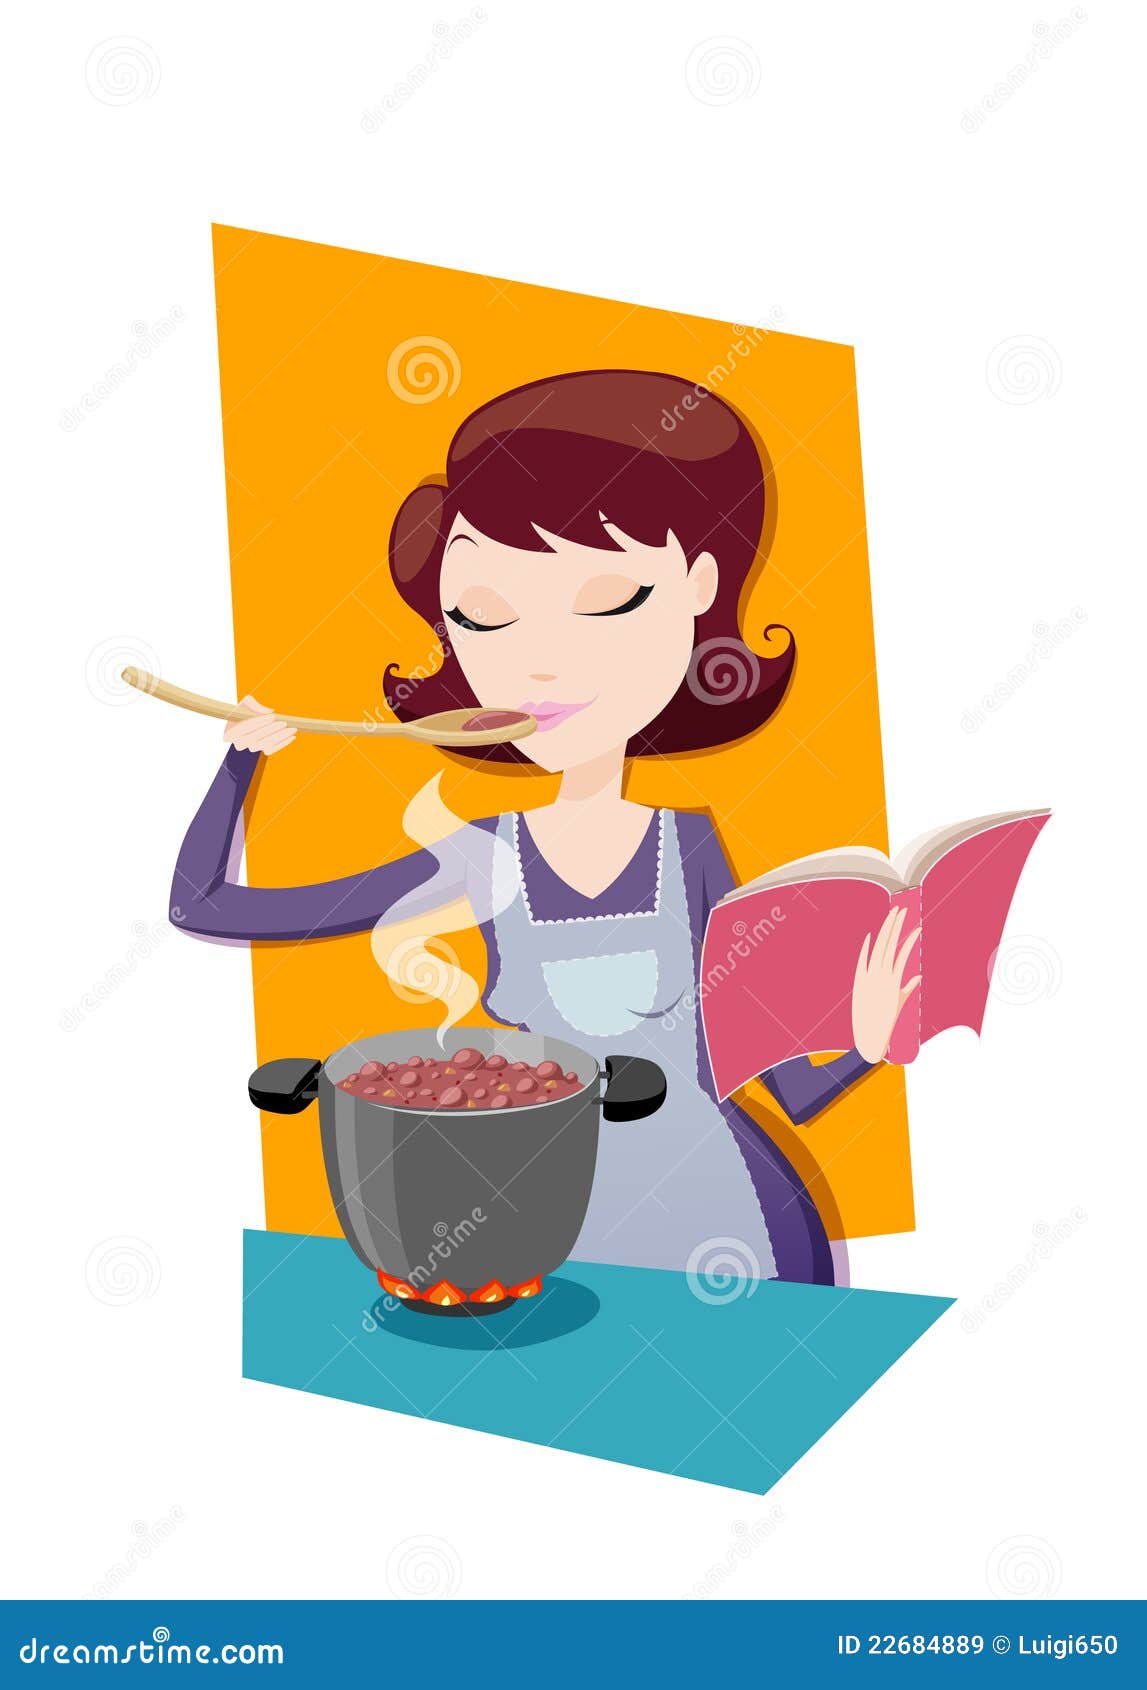 mom cooking clipart free - photo #28